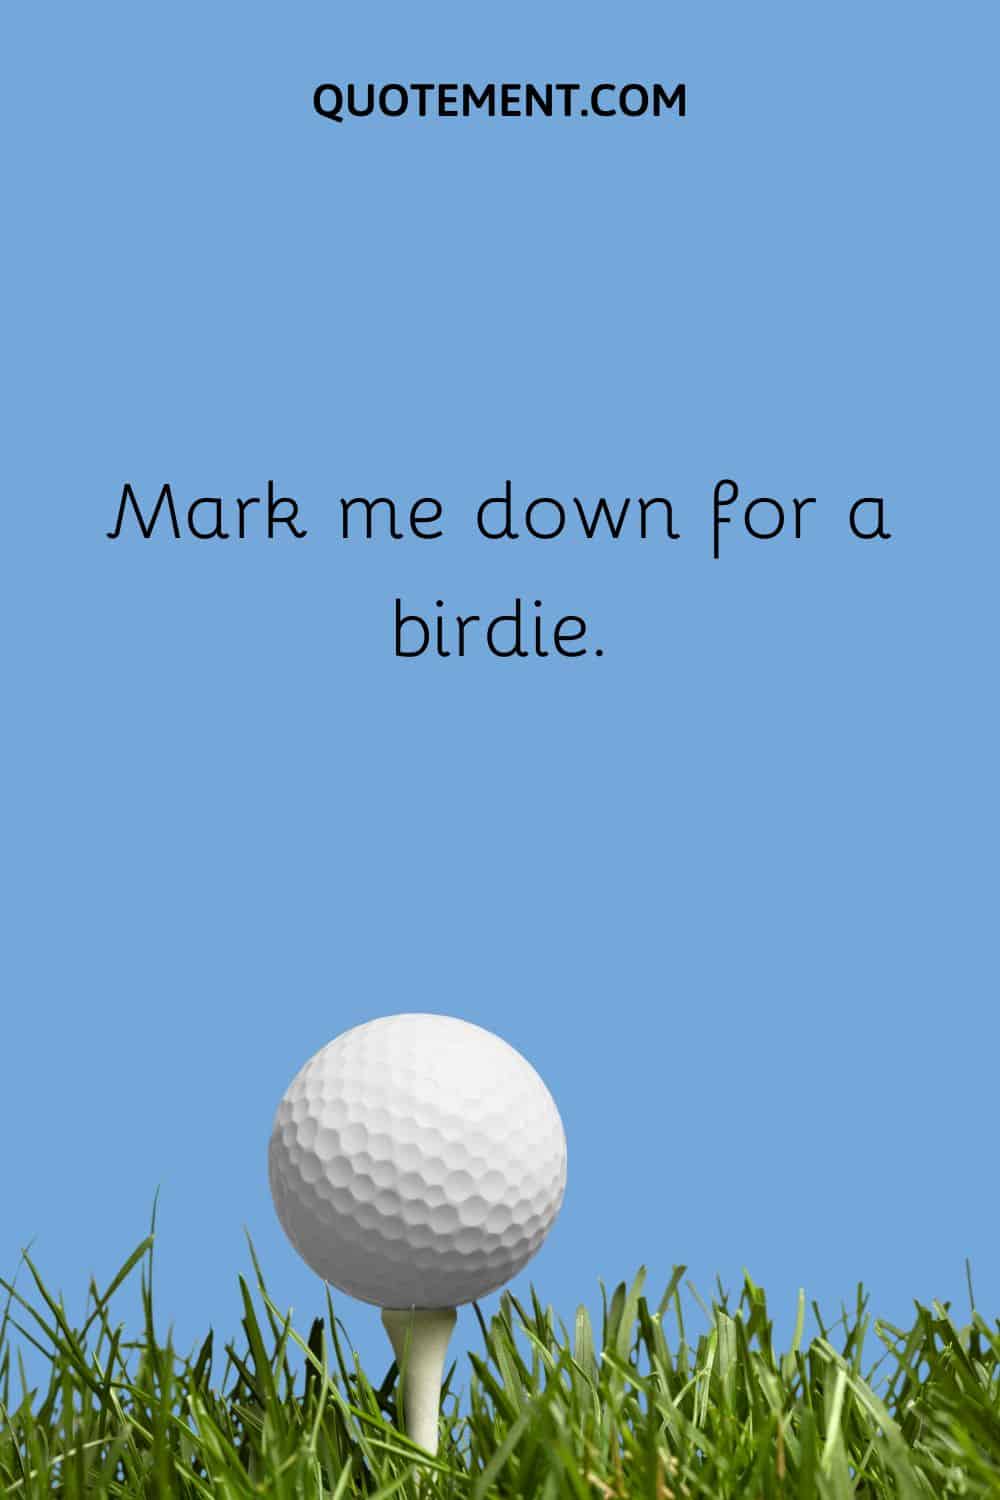 Mark me down for a birdie.